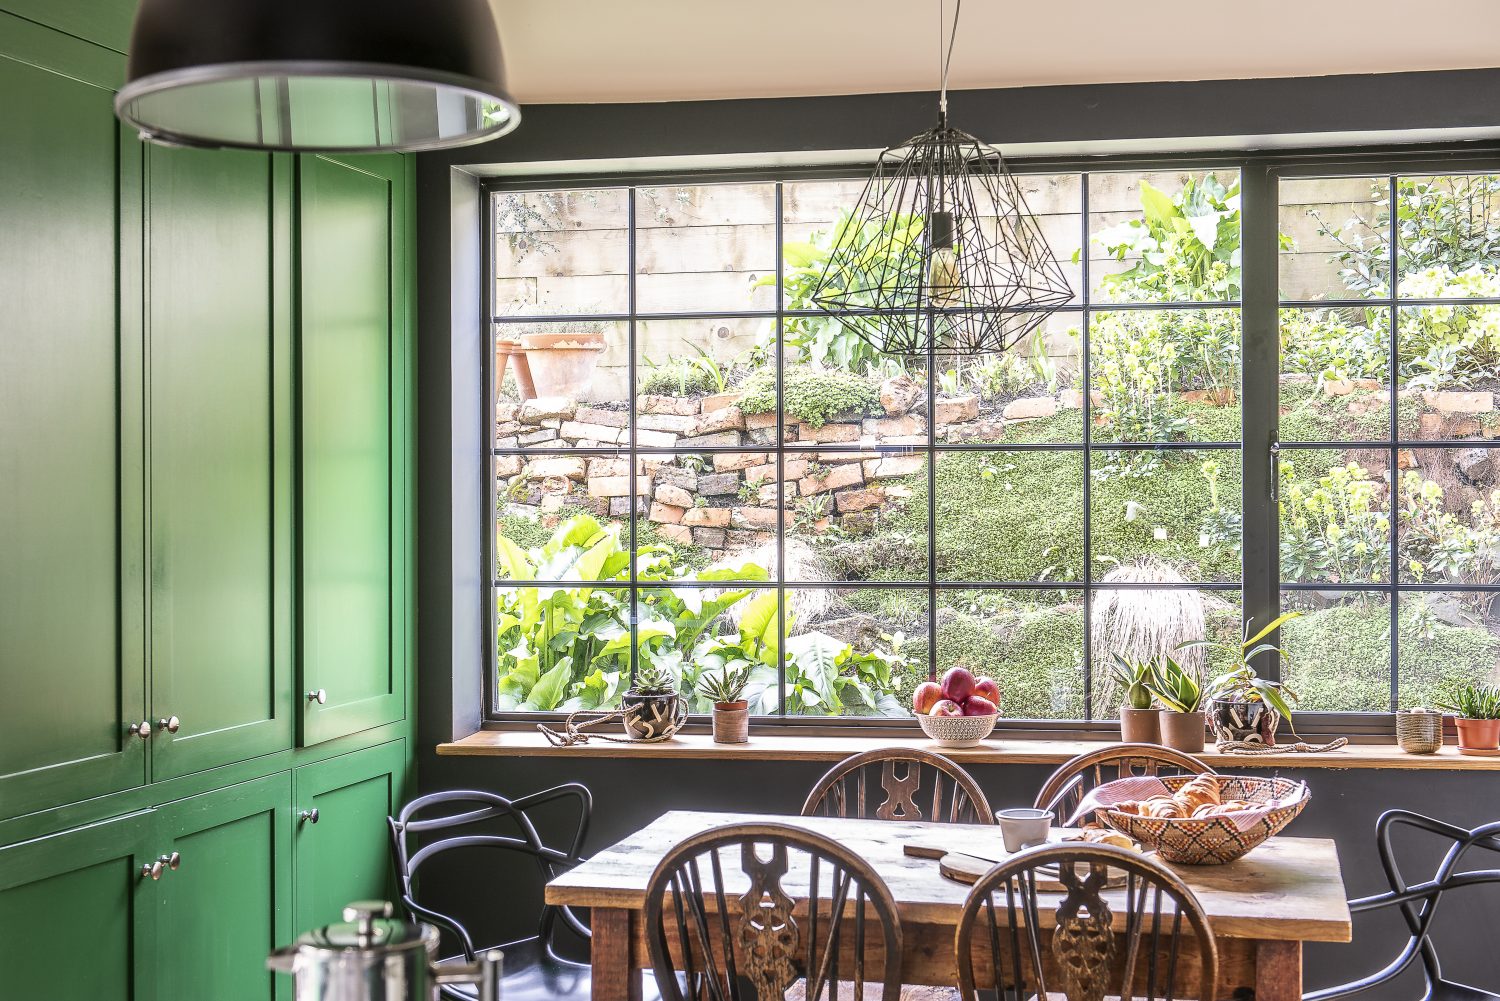 The cabinet work and cupboards in the kitchen have all been painted in a bright grass green, Sadie’s favourite colour, with black accent walls around the range cooker and the picture window